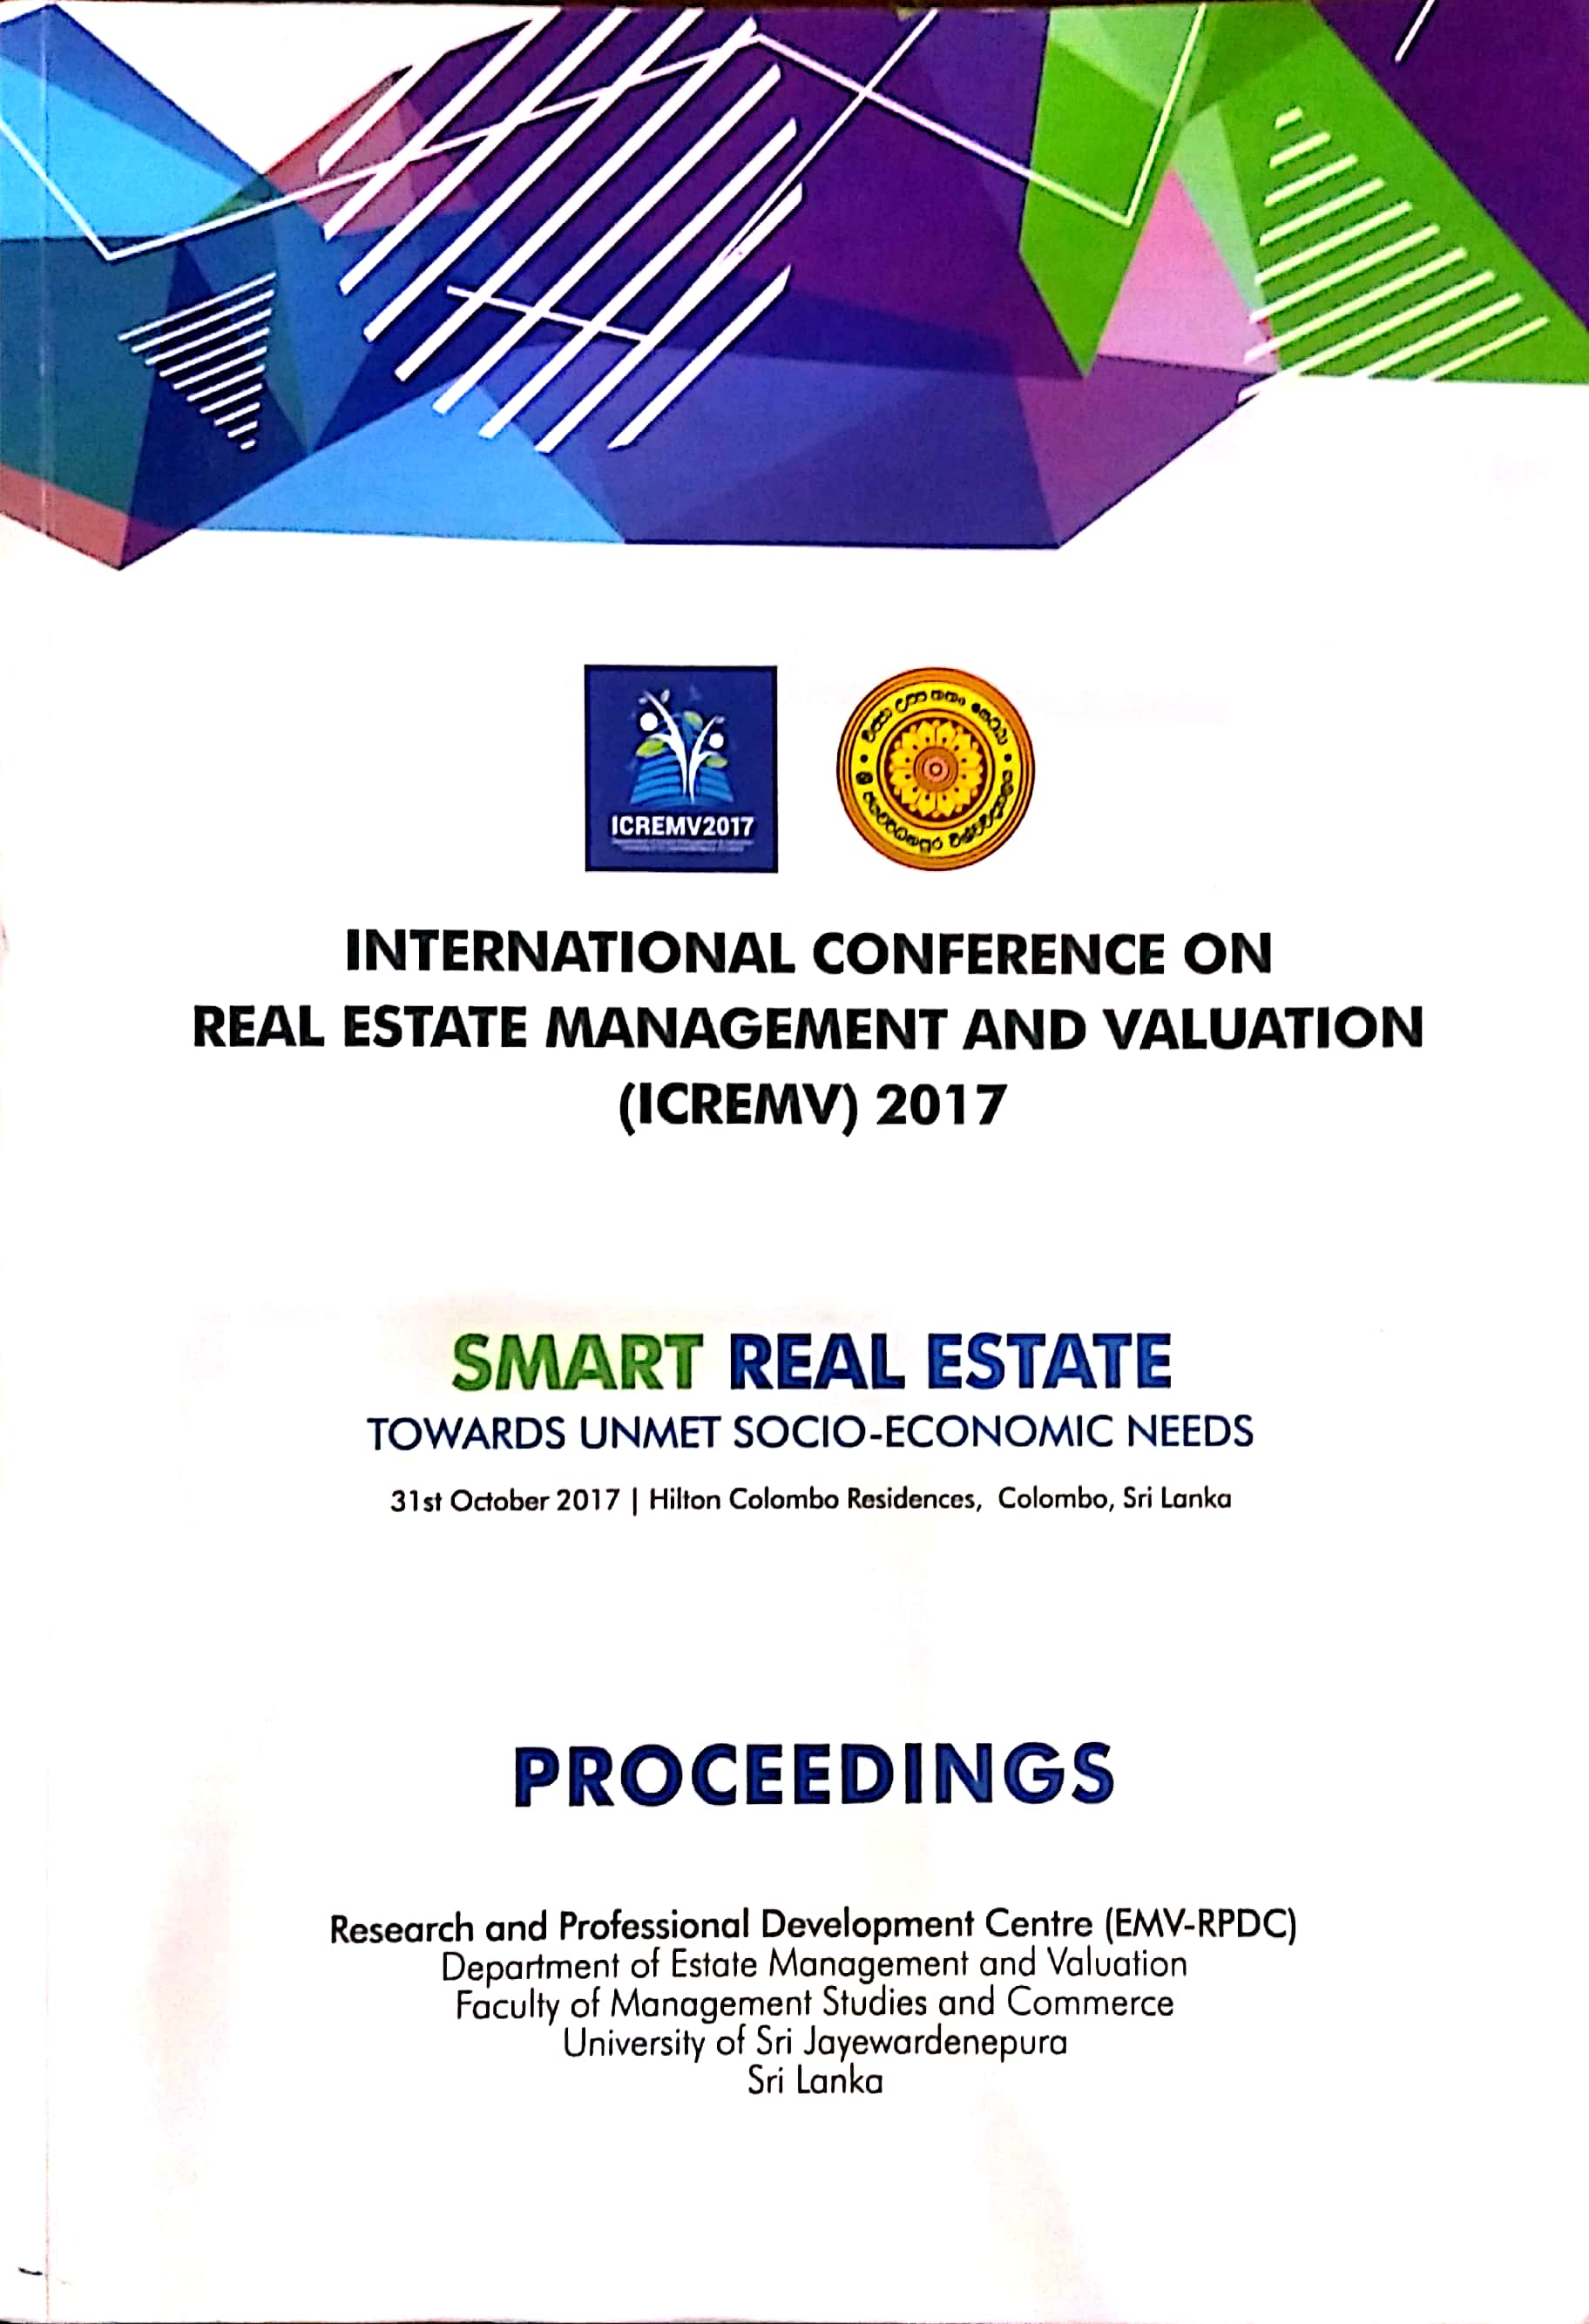 The 1st International Conference on Real Estate Management and Valuation.